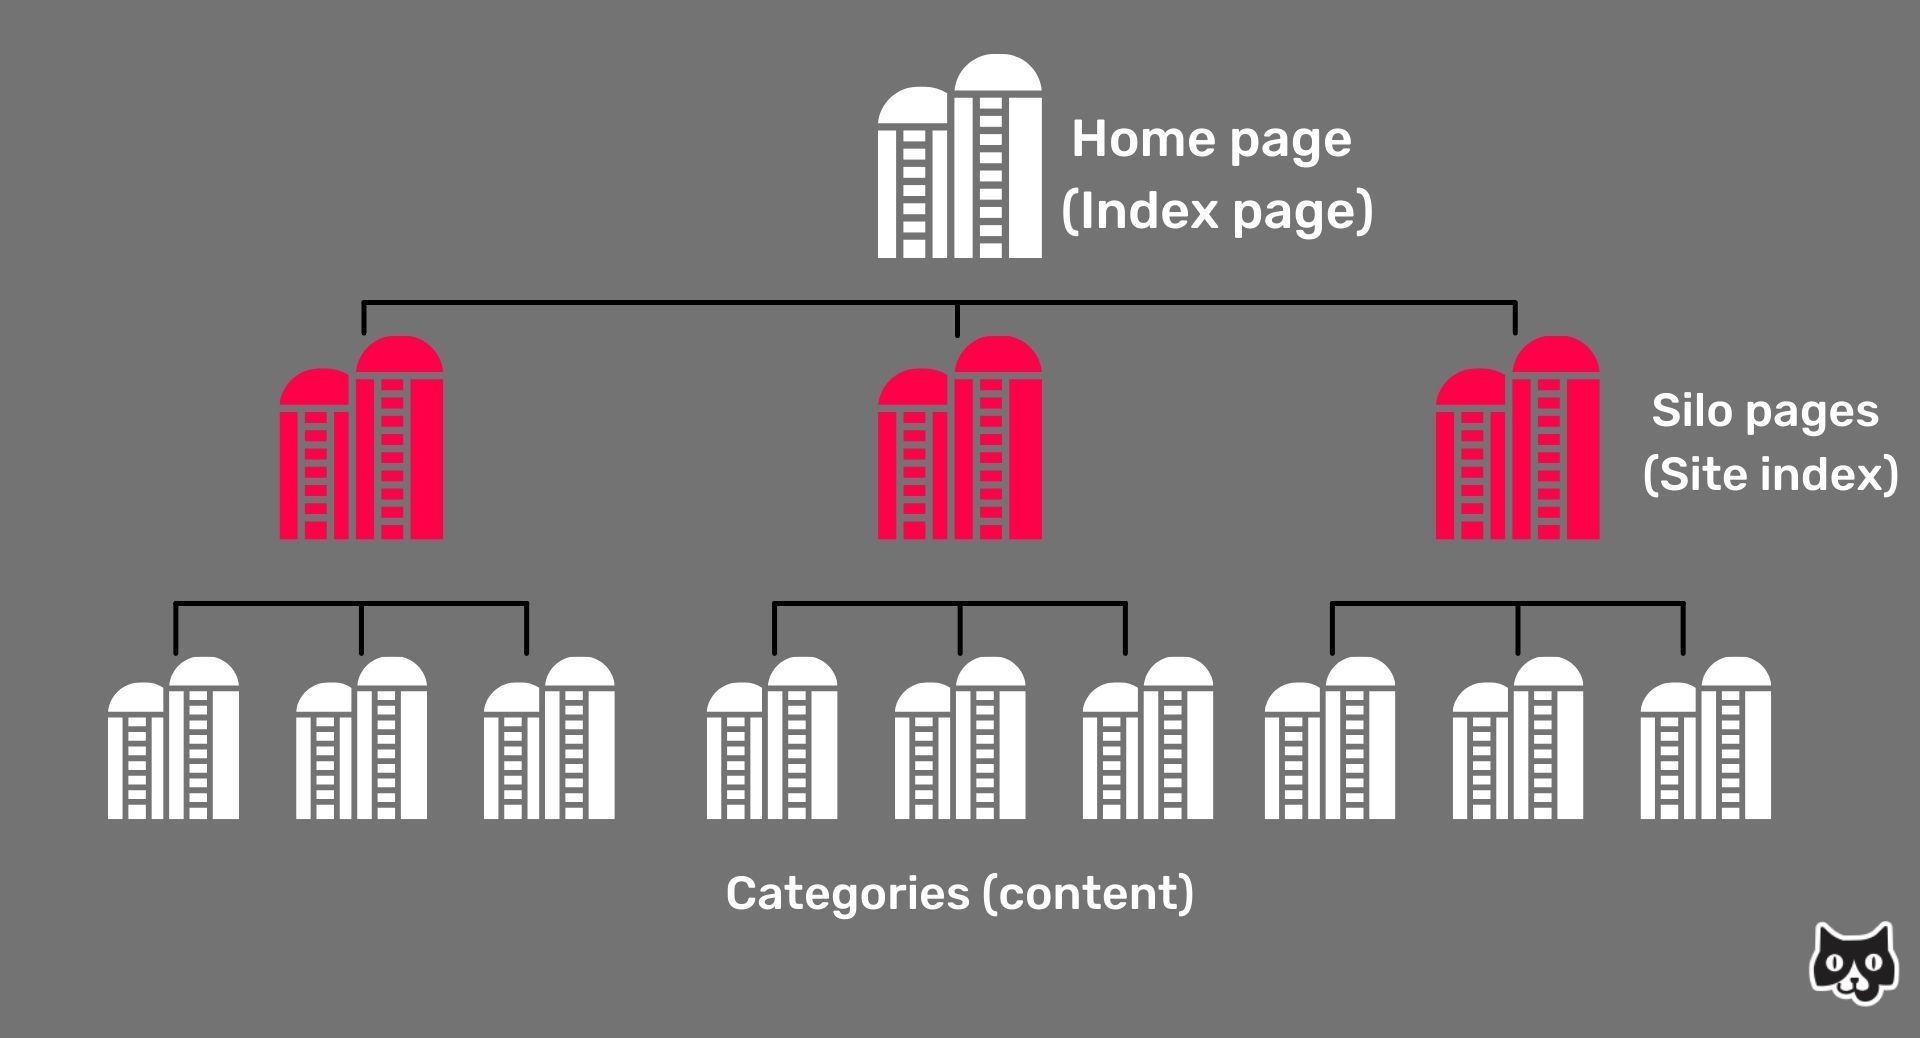 This image is a graphic depicting the organization of content silos. At the top is a silo icon labeled home page (index page).  Branching below the home page are three more silos, red this time instead of white, that are labeled as the Silo pages (site index).  Each of these silo pages has three more silos branching beneath them in white. This last layer is labeled 'categories (content)'